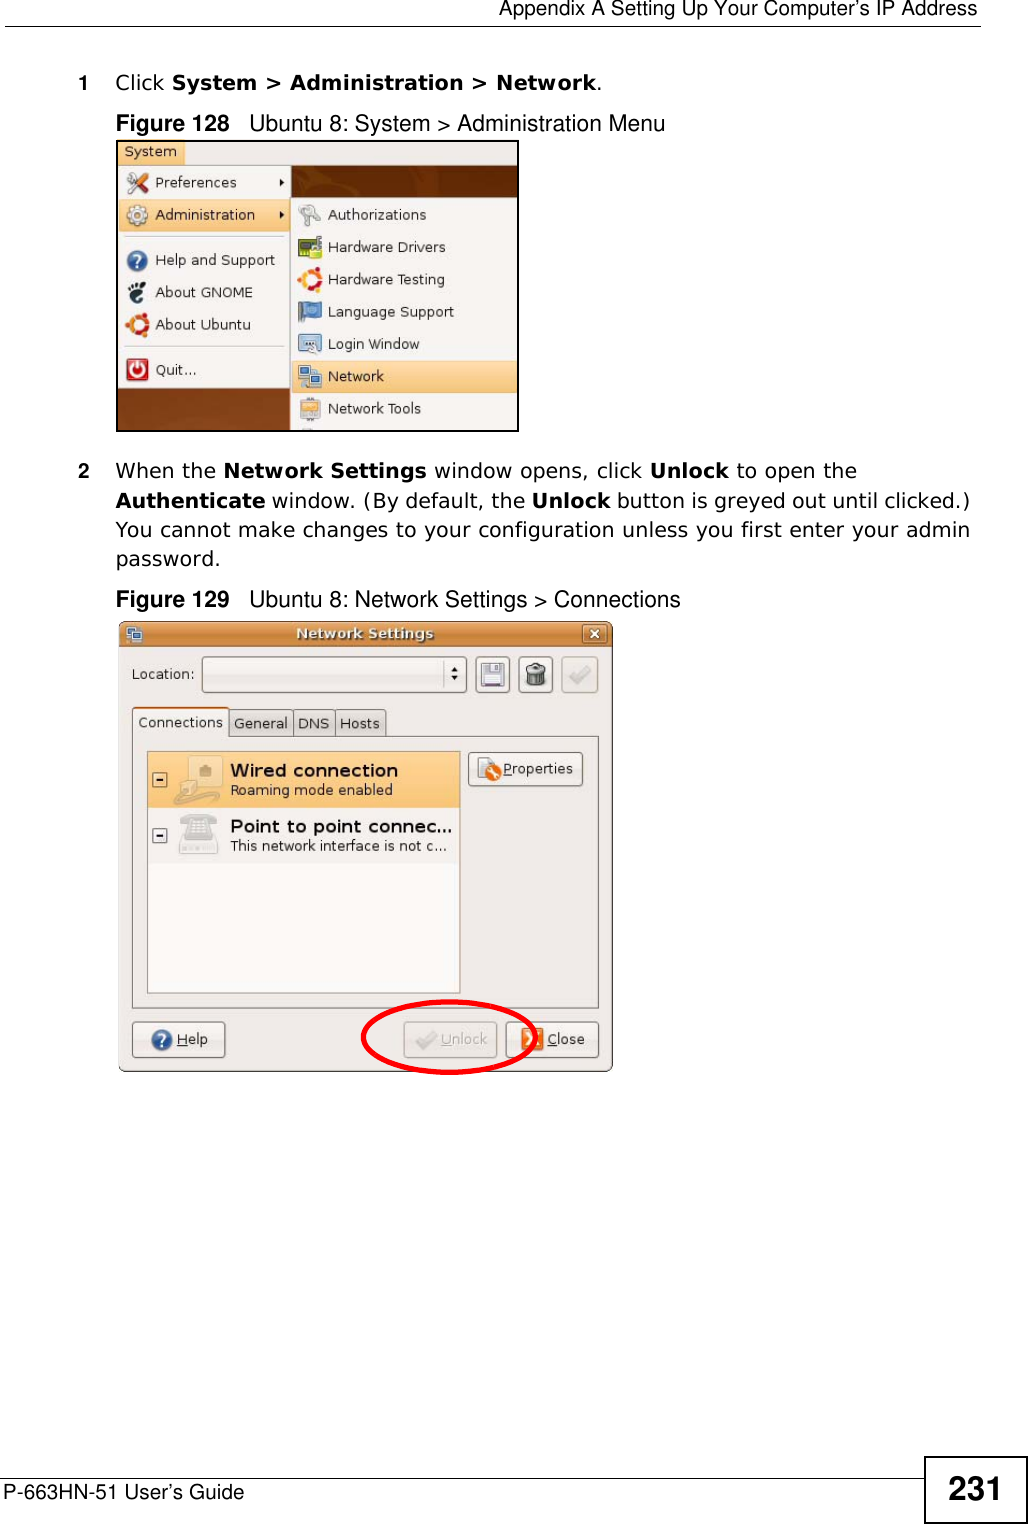  Appendix A Setting Up Your Computer’s IP AddressP-663HN-51 User’s Guide 2311Click System &gt; Administration &gt; Network.Figure 128   Ubuntu 8: System &gt; Administration Menu2When the Network Settings window opens, click Unlock to open the Authenticate window. (By default, the Unlock button is greyed out until clicked.) You cannot make changes to your configuration unless you first enter your admin password.Figure 129   Ubuntu 8: Network Settings &gt; Connections